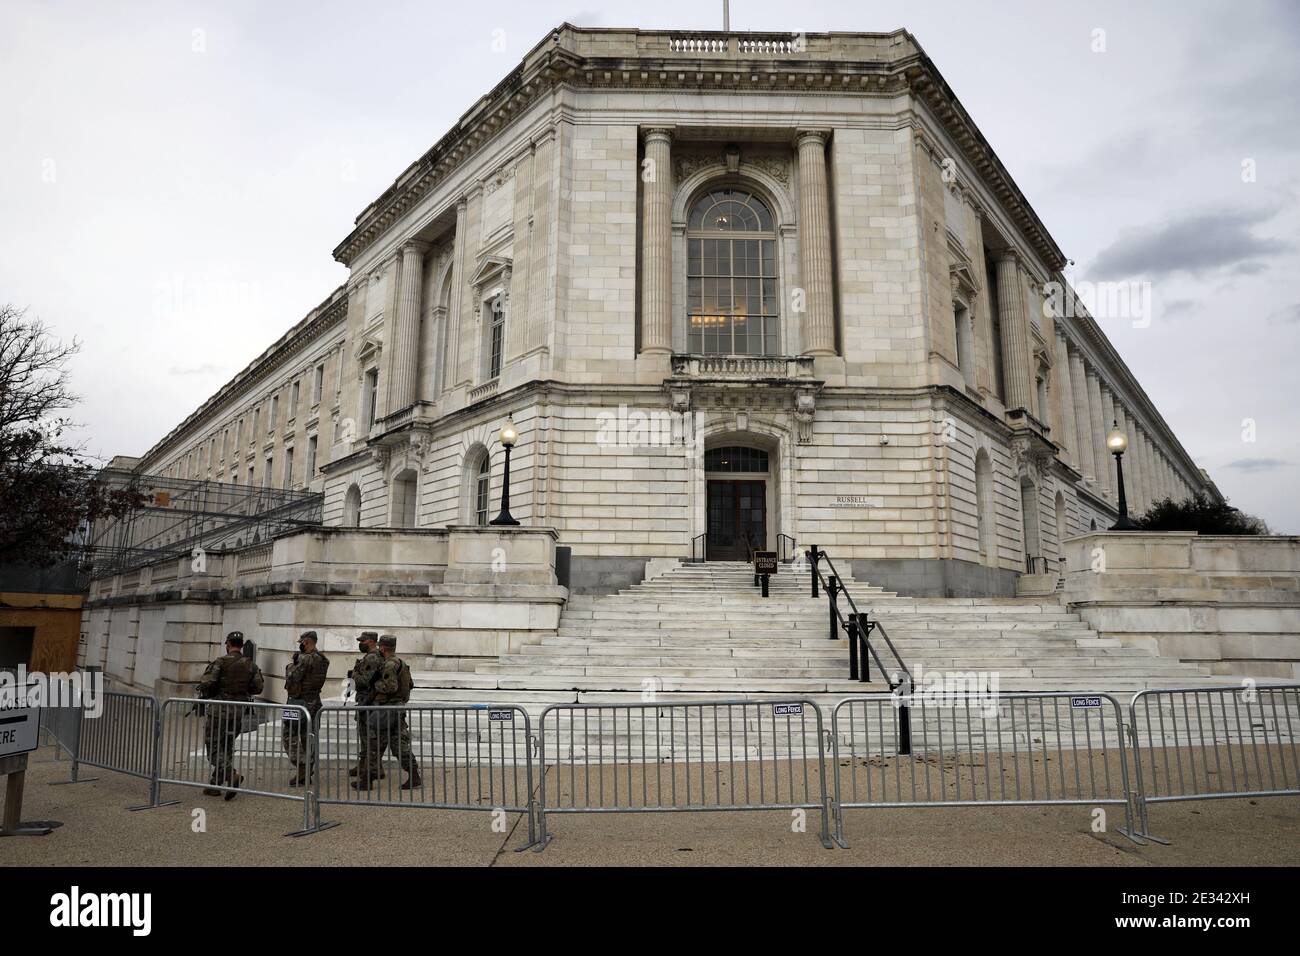 Members of the National Guard secure the area around U.S. Capitol ahead of the upcoming inauguration for President-elect Joe Biden in Washington on January 16, 2021. Photo by Yuri Gripas/ABACAPRESS.COM Stock Photo